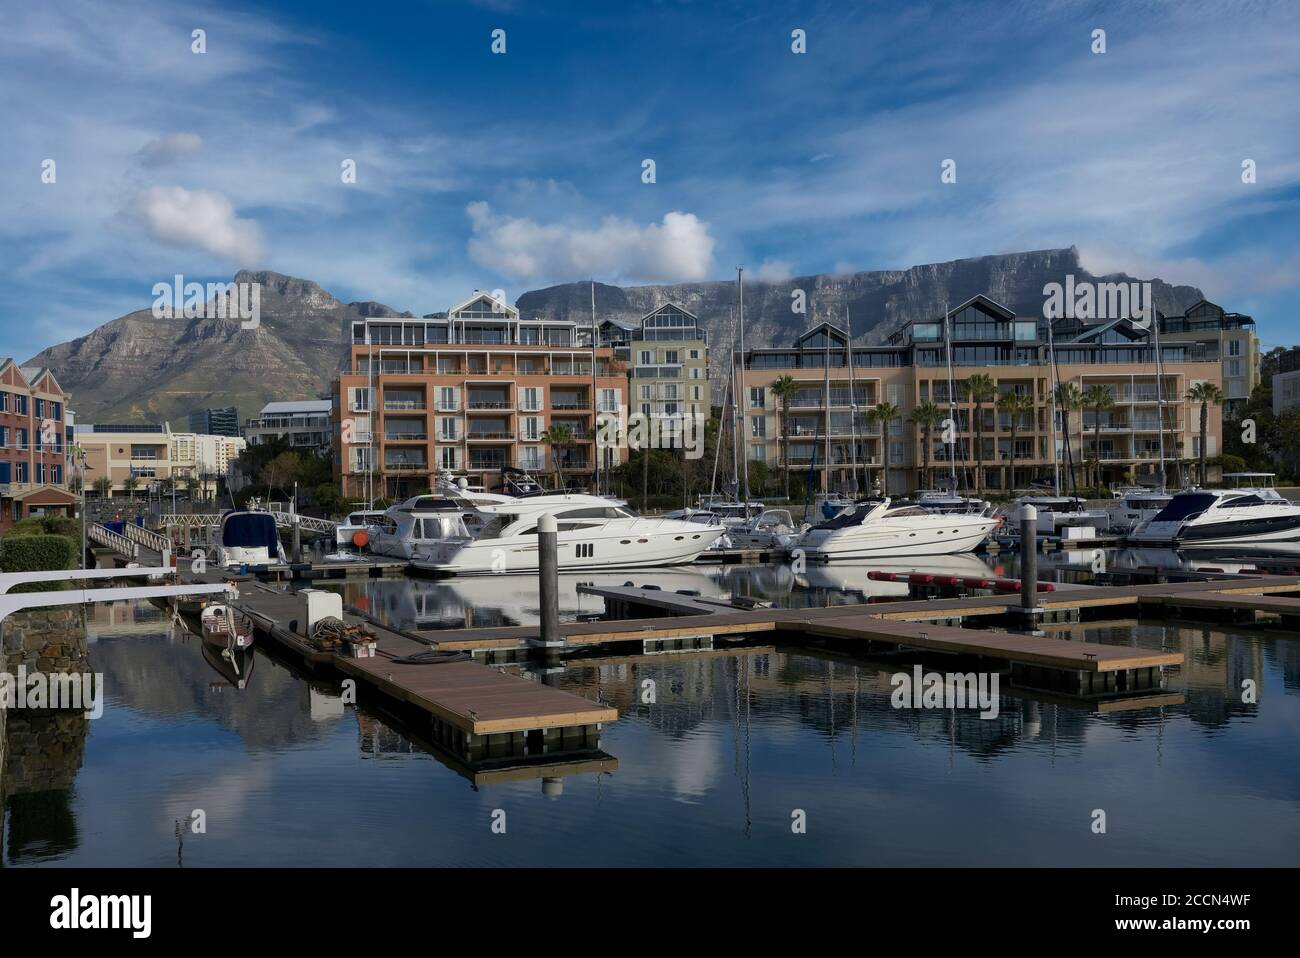 Third silent Deliberately The Marina at the V&A Waterfront in Cape Town, South Africa Stock Photo -  Alamy